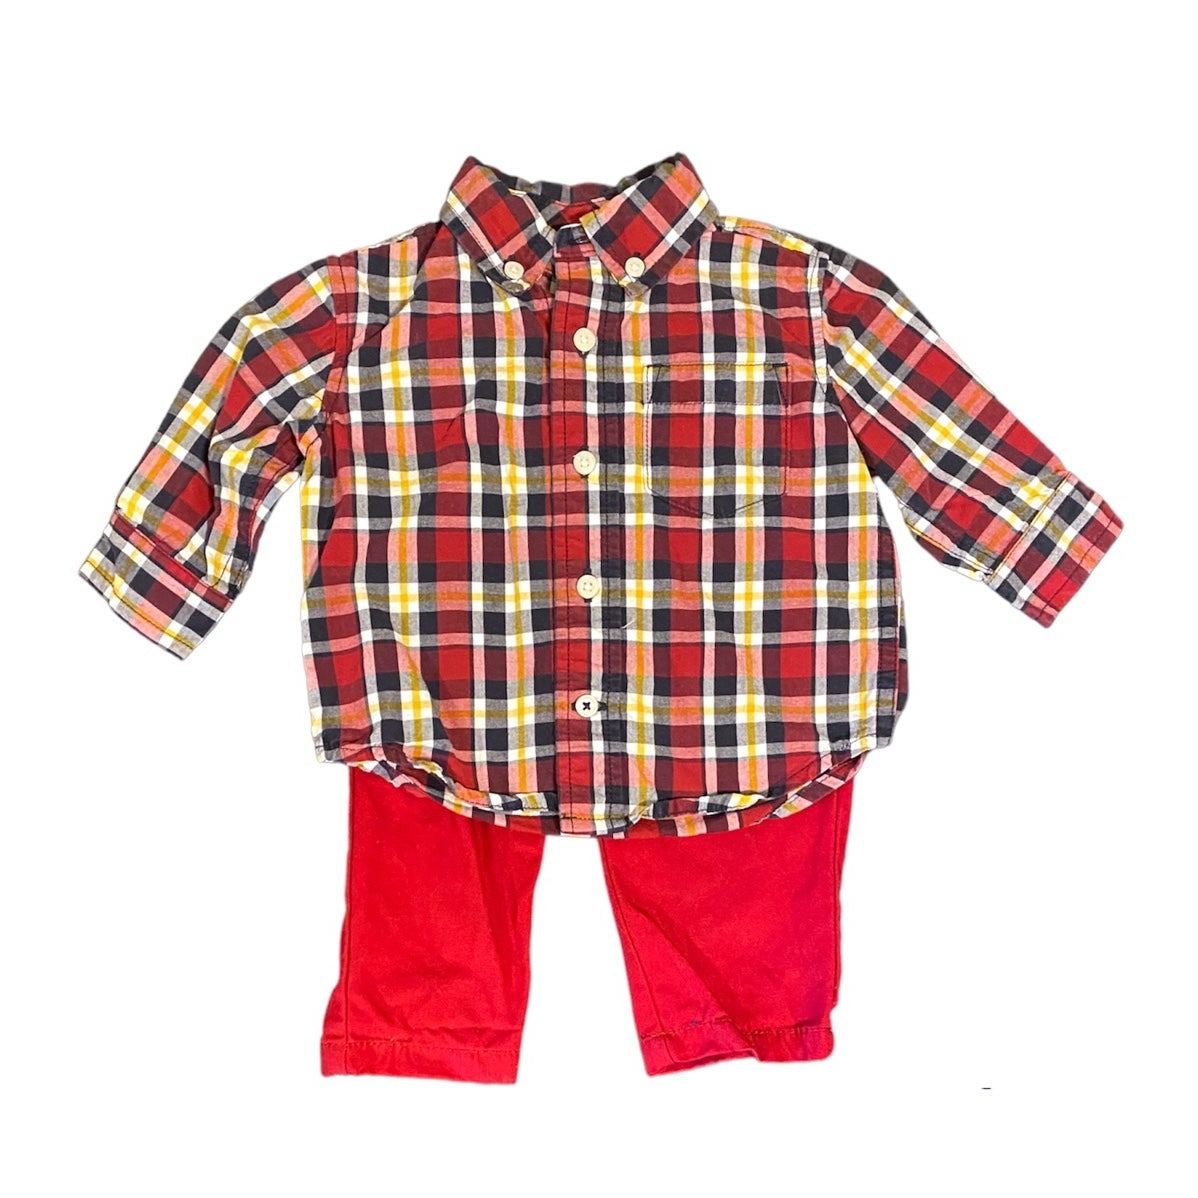 3-6 months Gymboree Christmas outfit